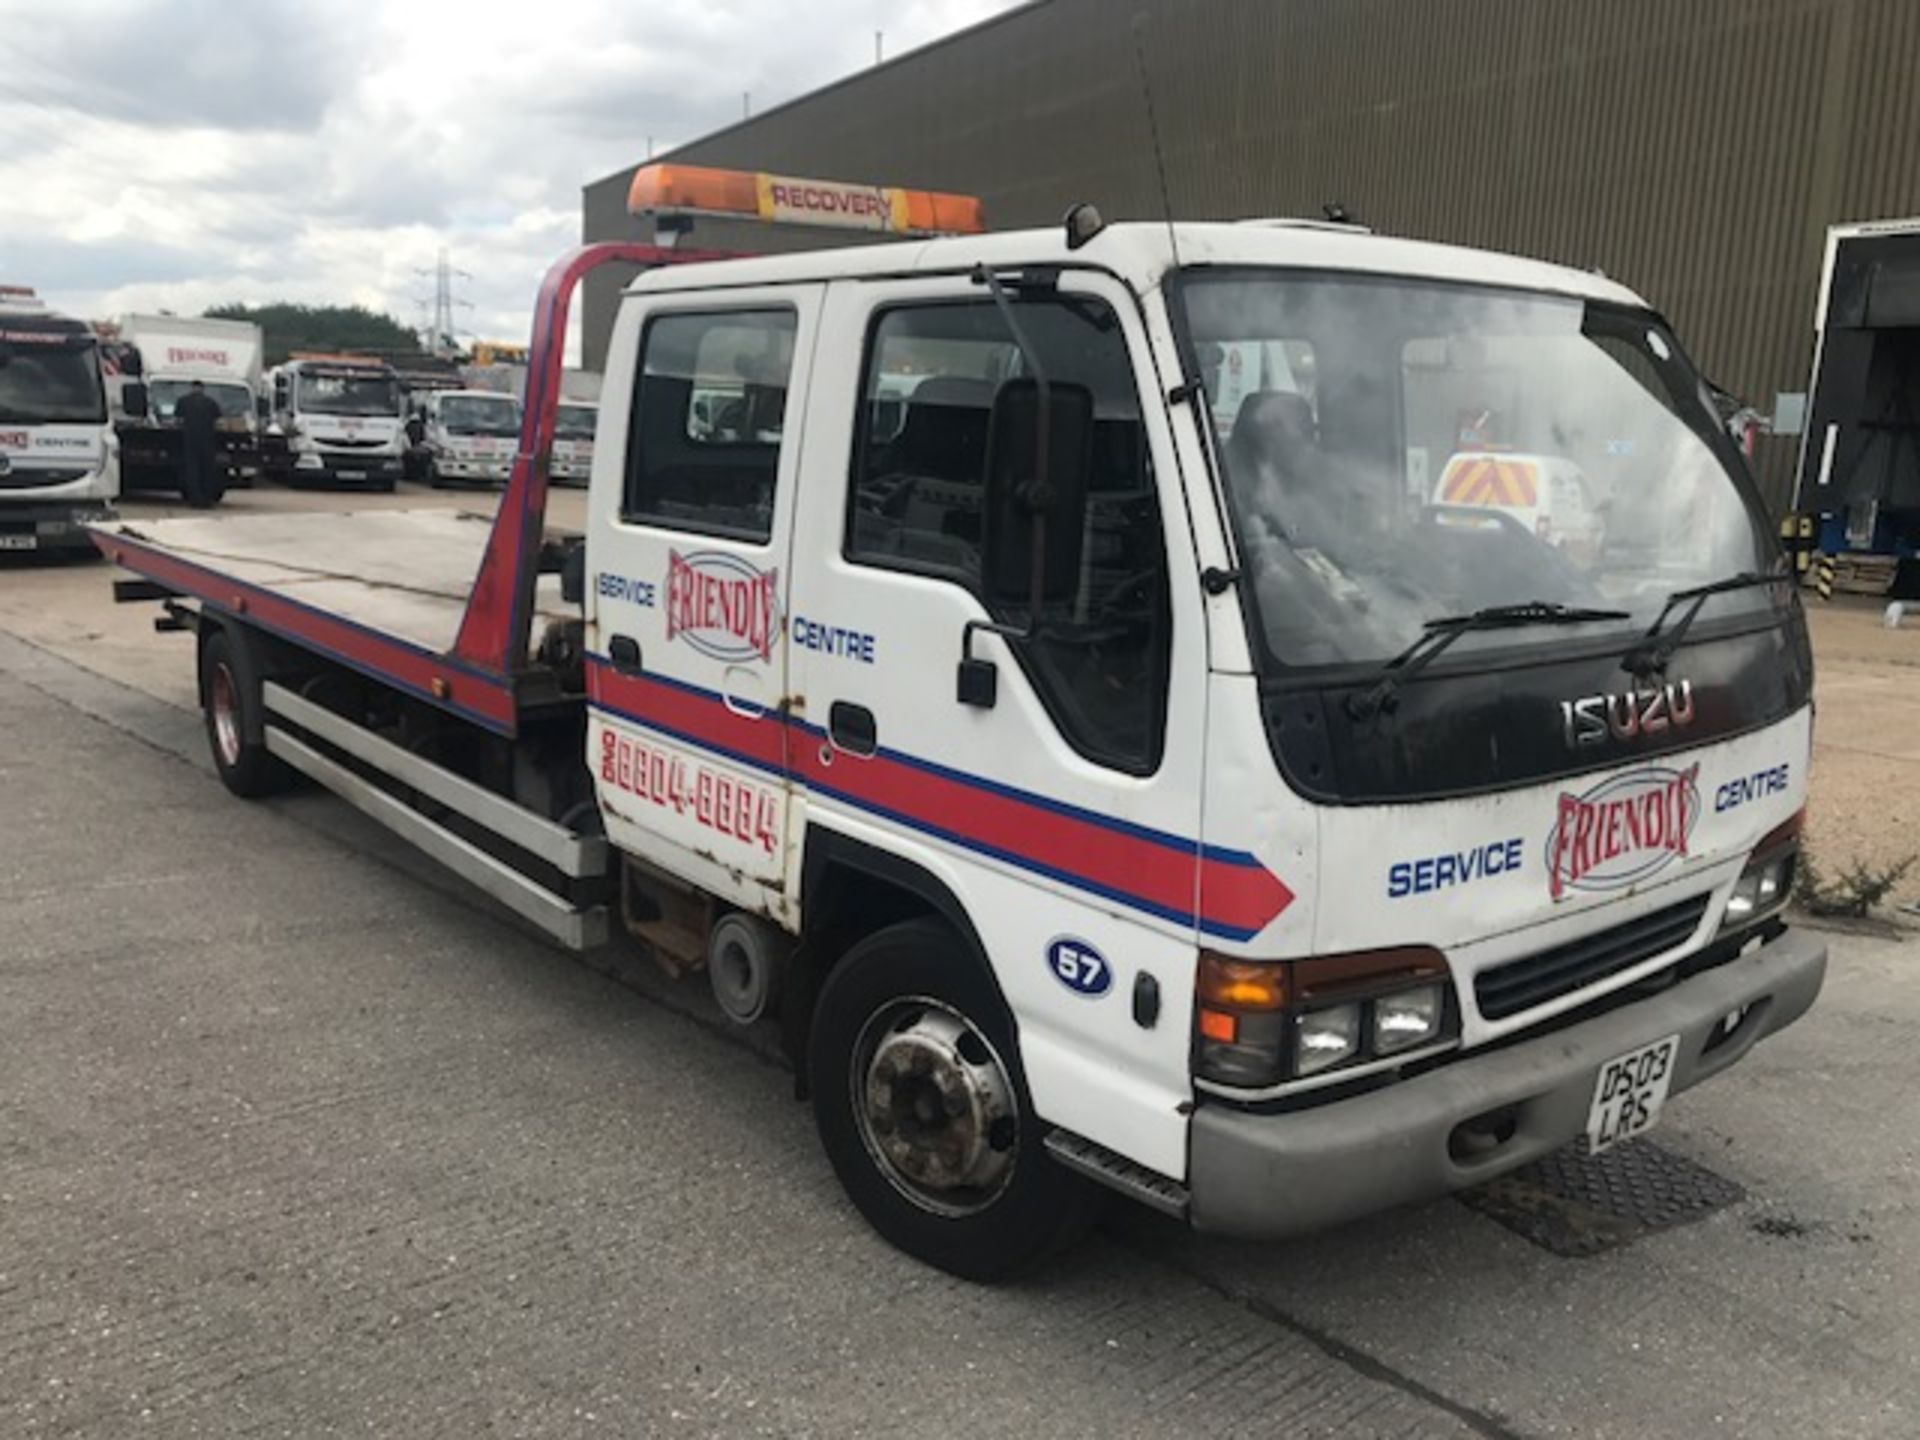 Isuzu NQR 7.5t crew cab breakdown recovery vehicle complete with flat bed body unbadged, winch and